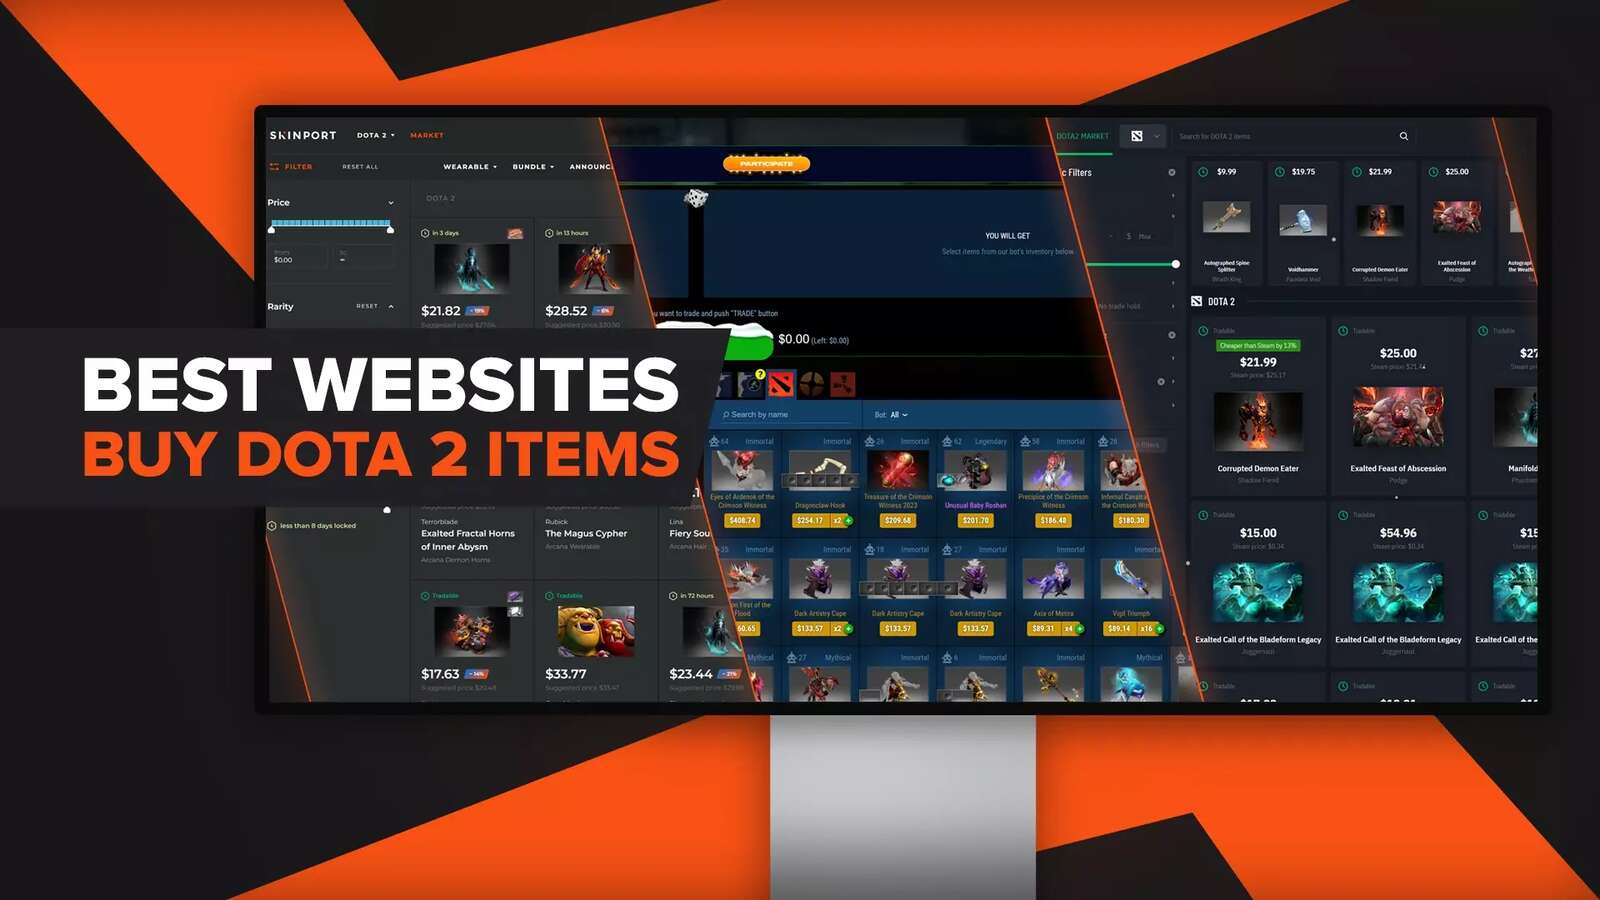 5 Best Websites To Buy Dota 2 Items [Tested]